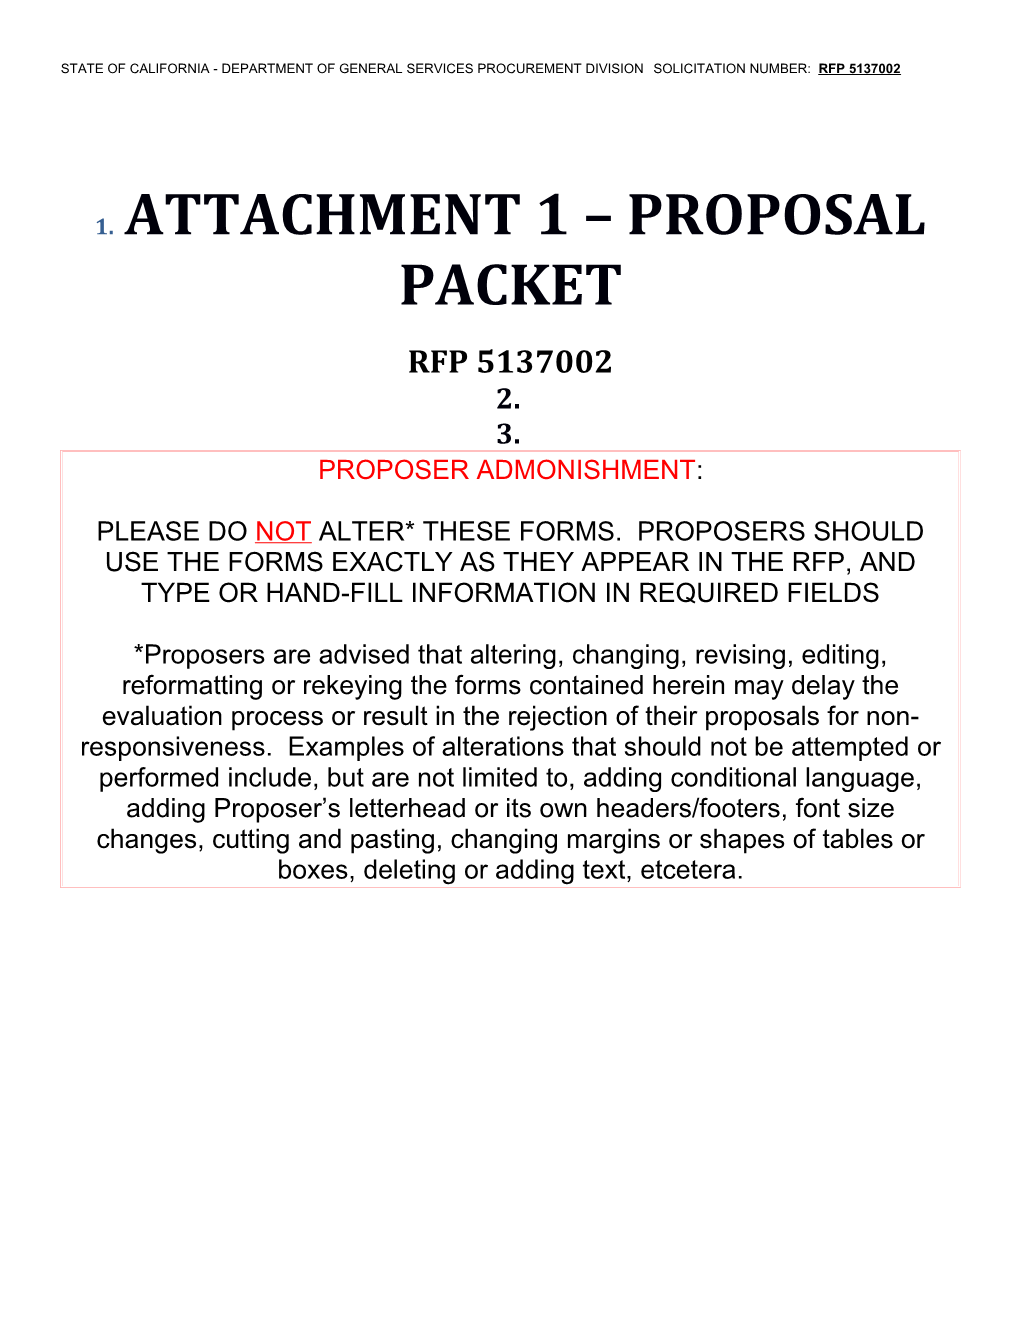 Attachment 1 Proposal Packet